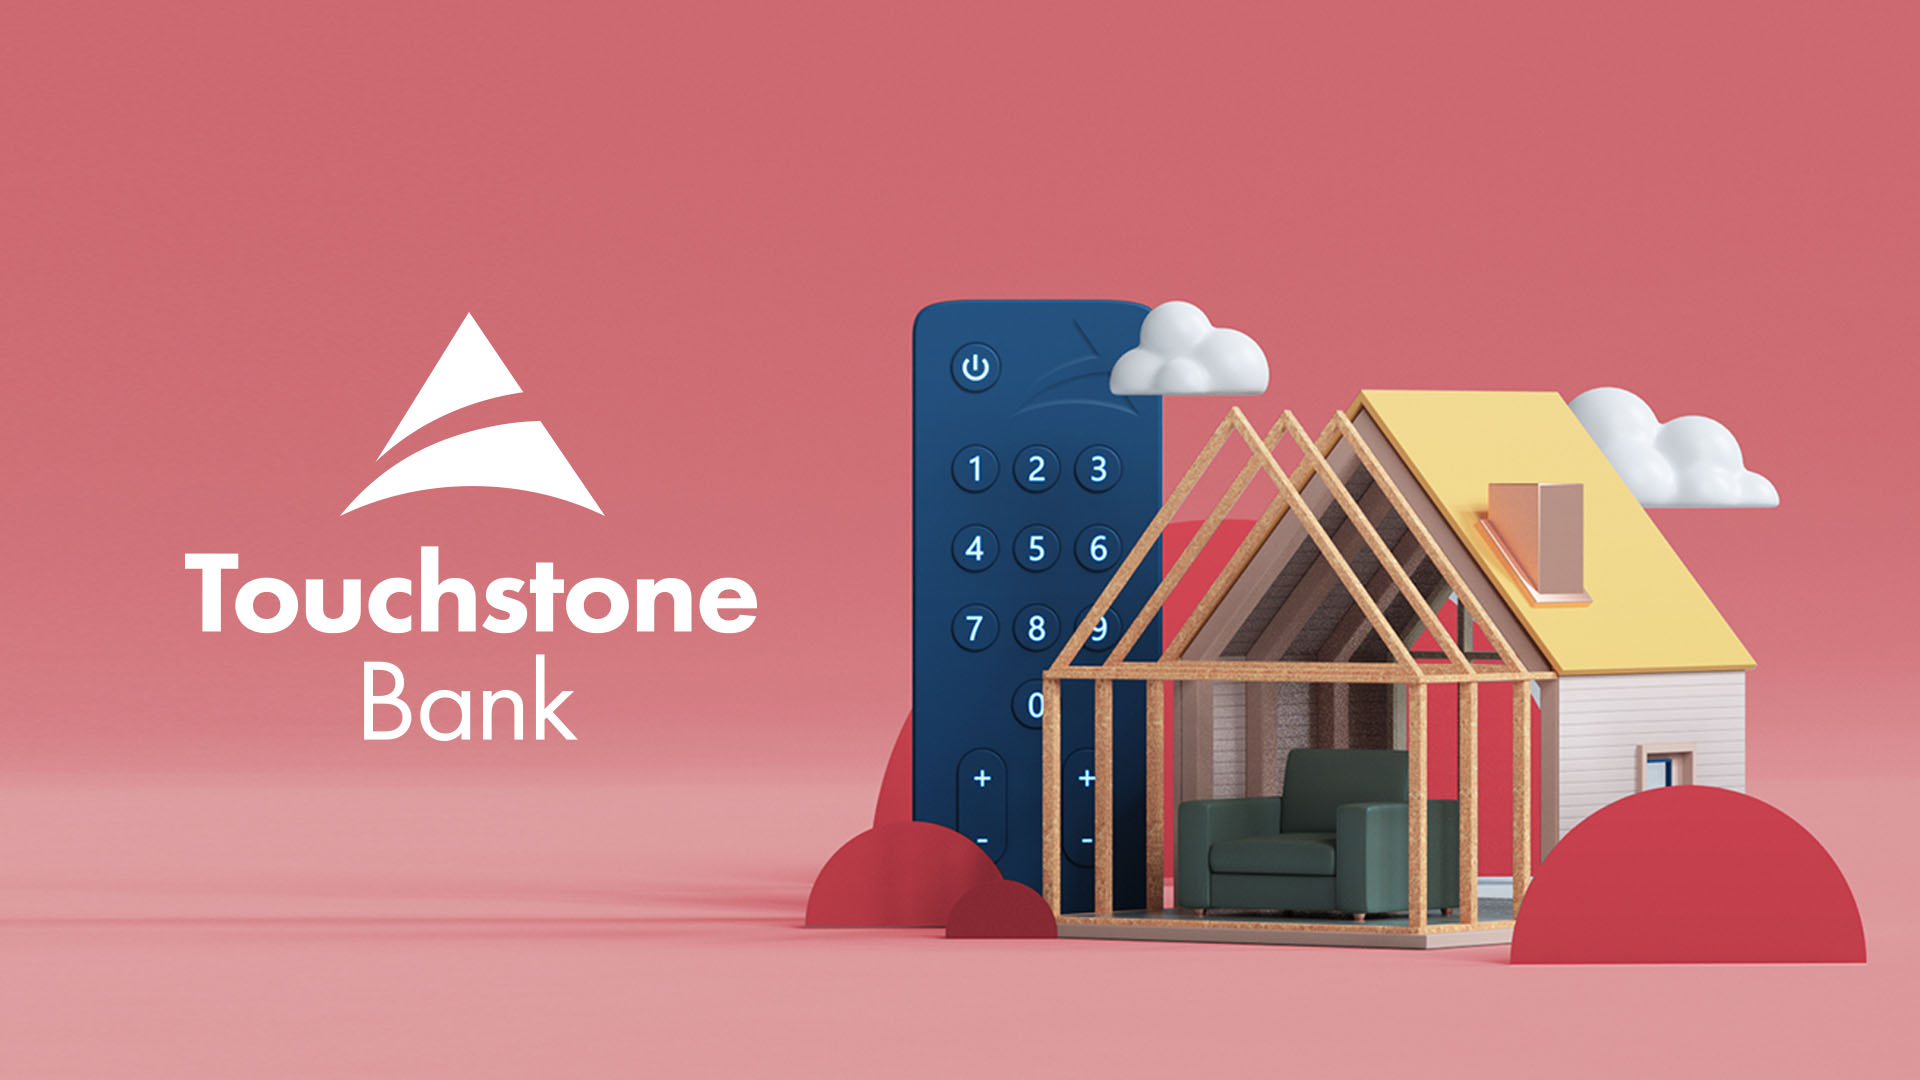 Touchstone Bank Logo and Ad